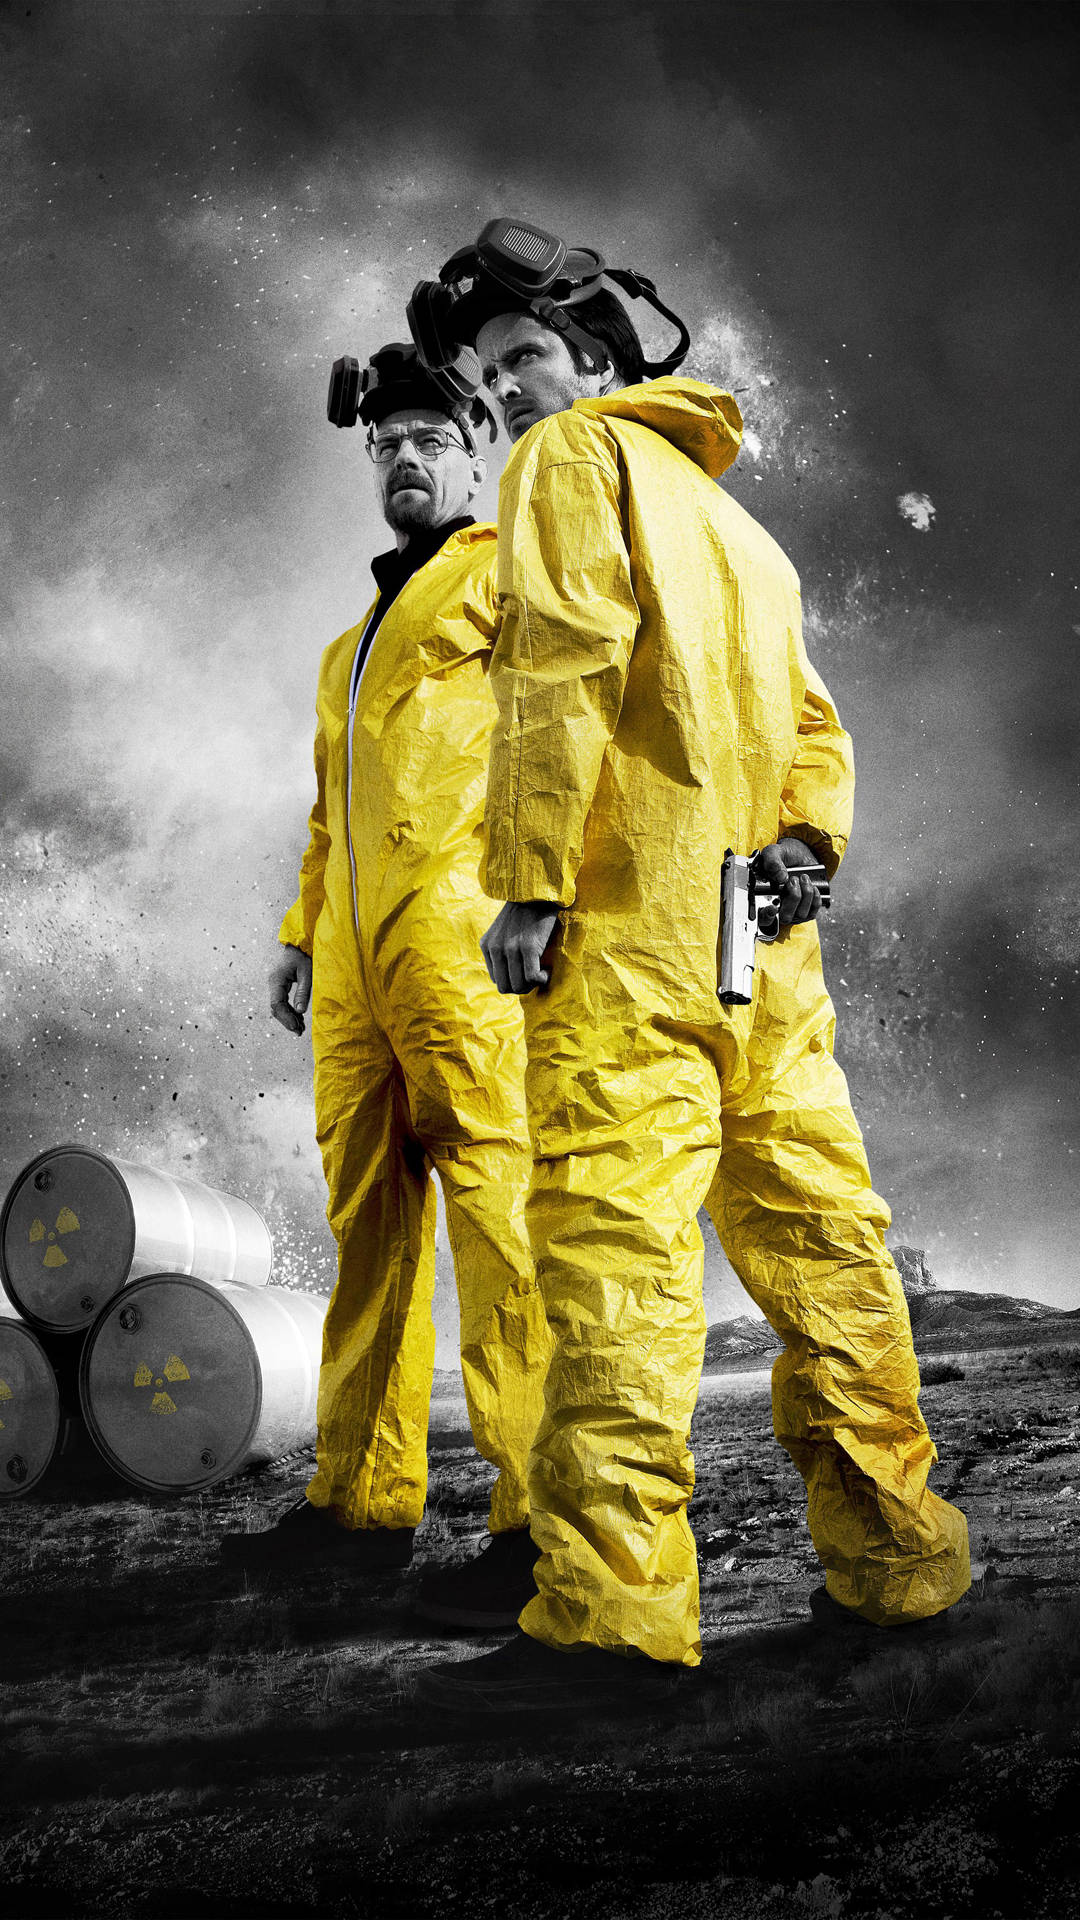 Breaking Bad's Walter White geared up for science Wallpaper